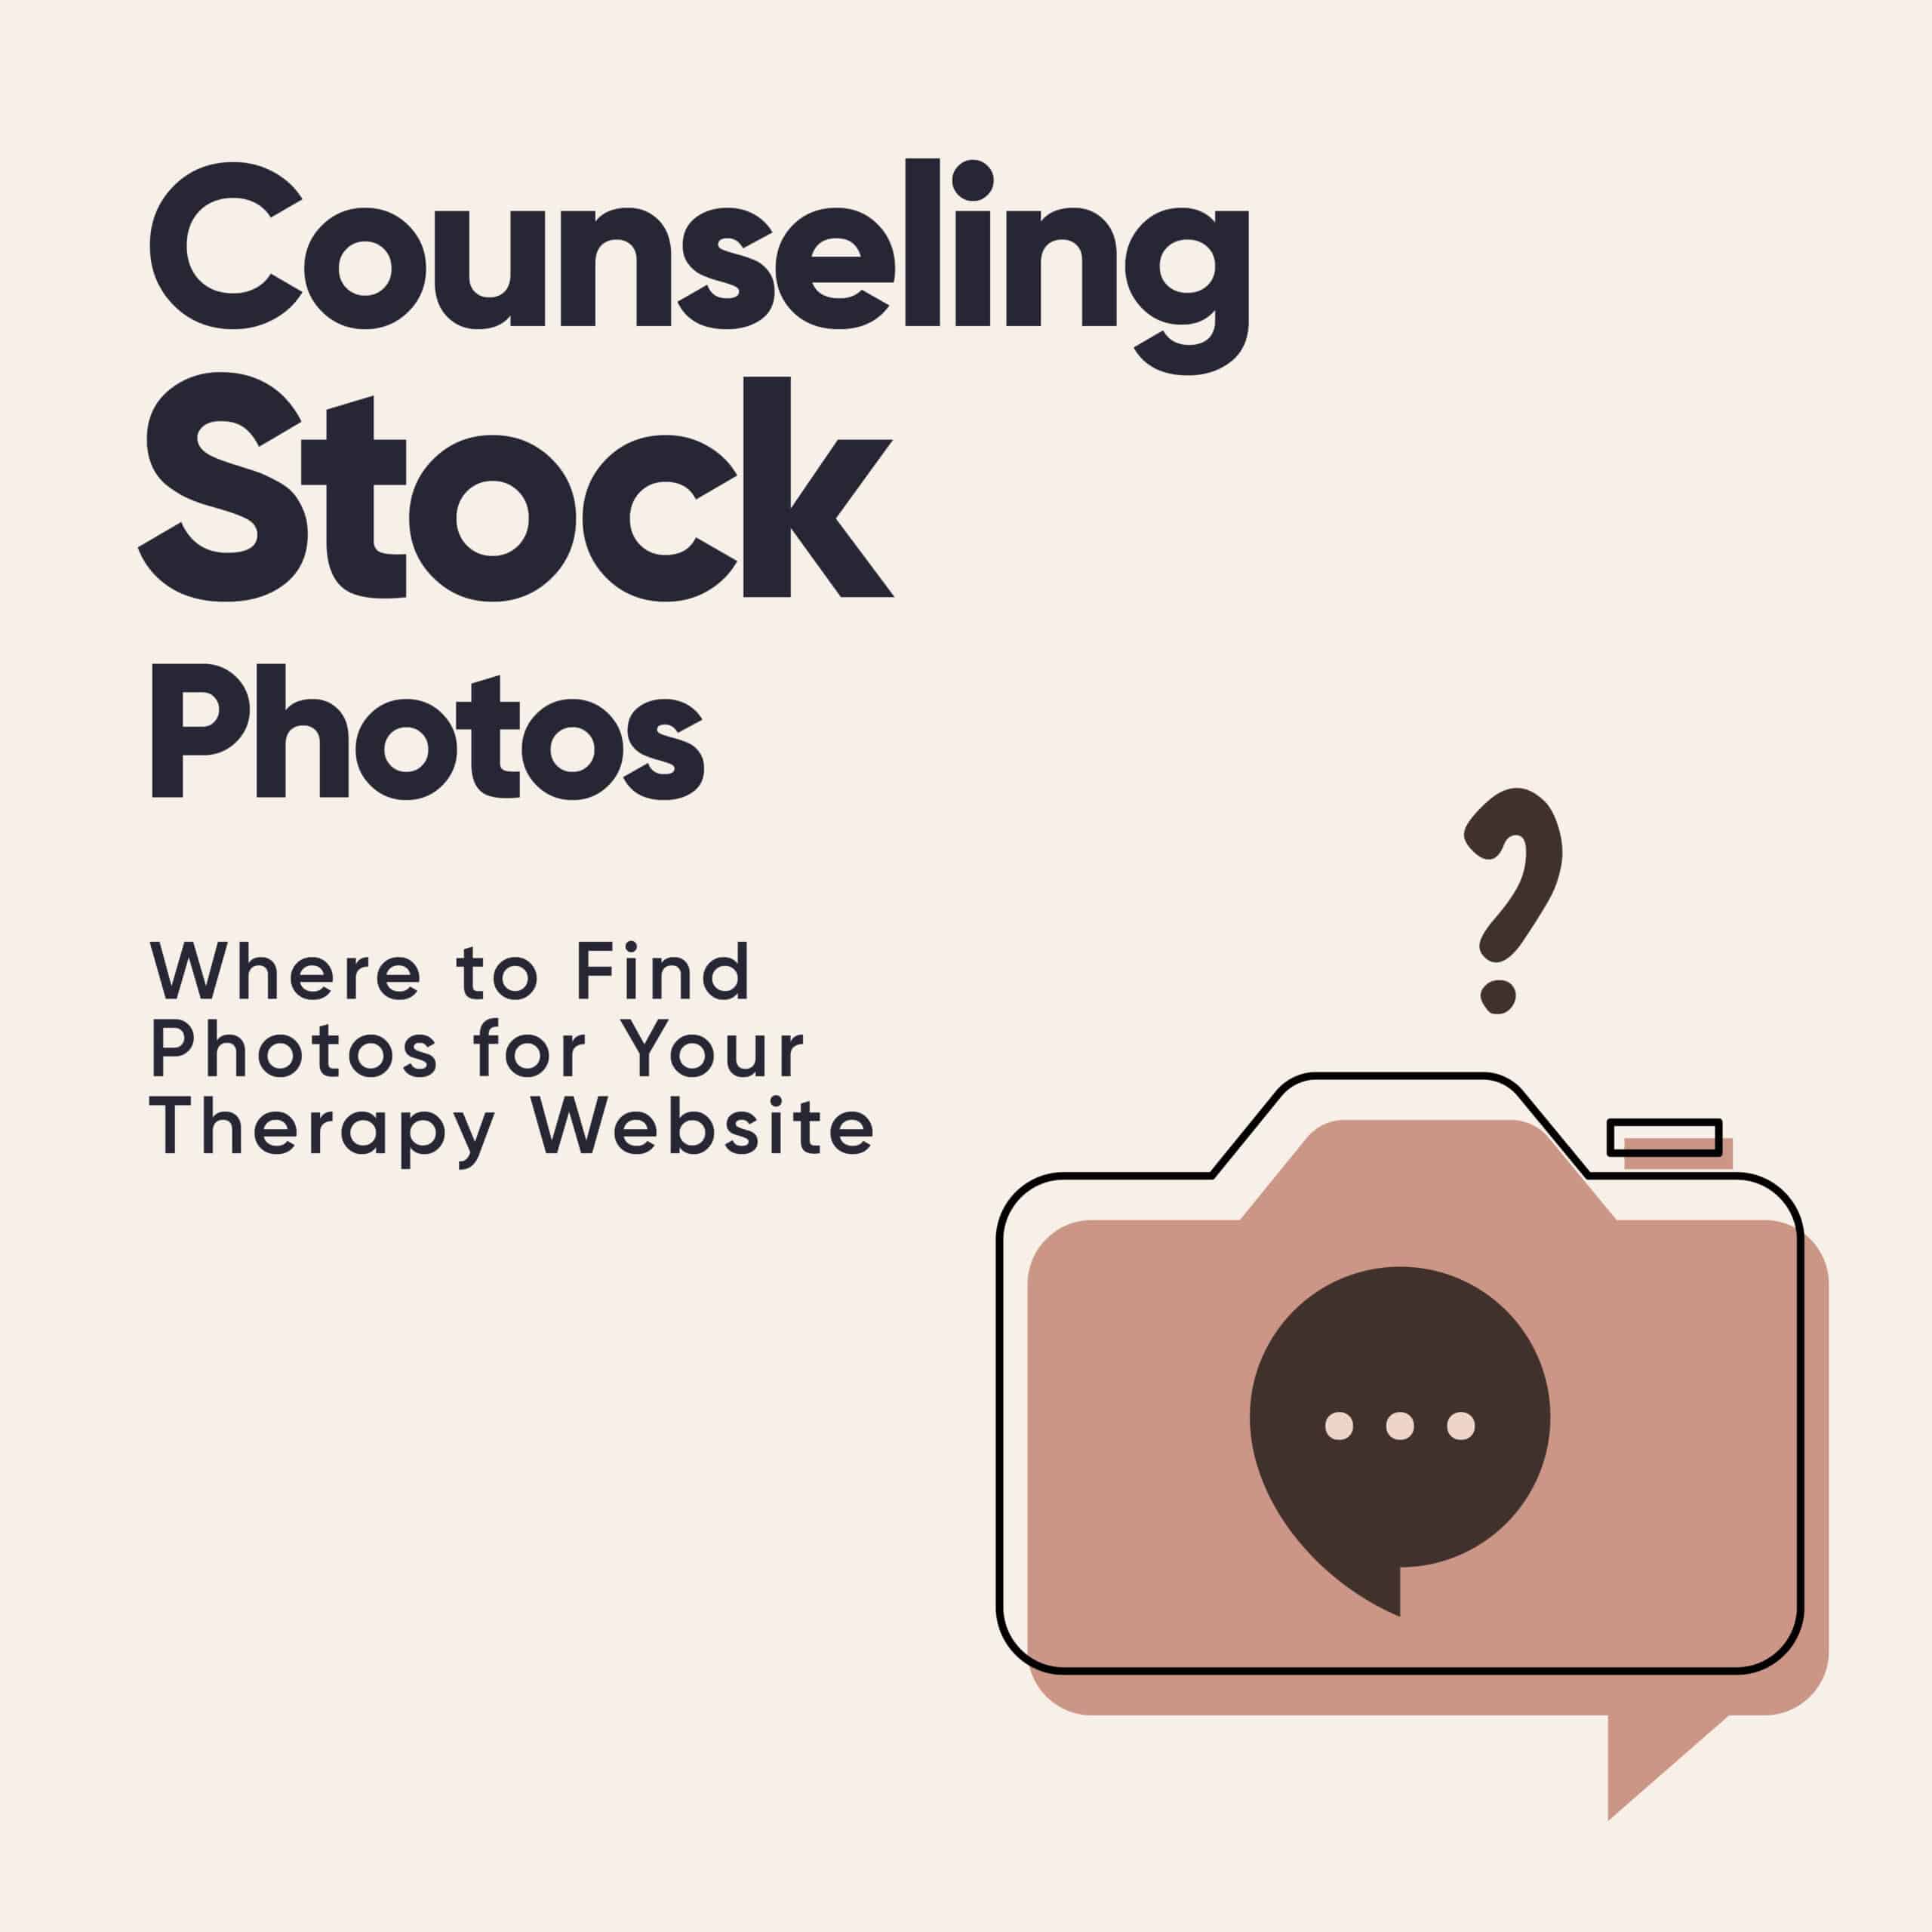 photos for your therapy website